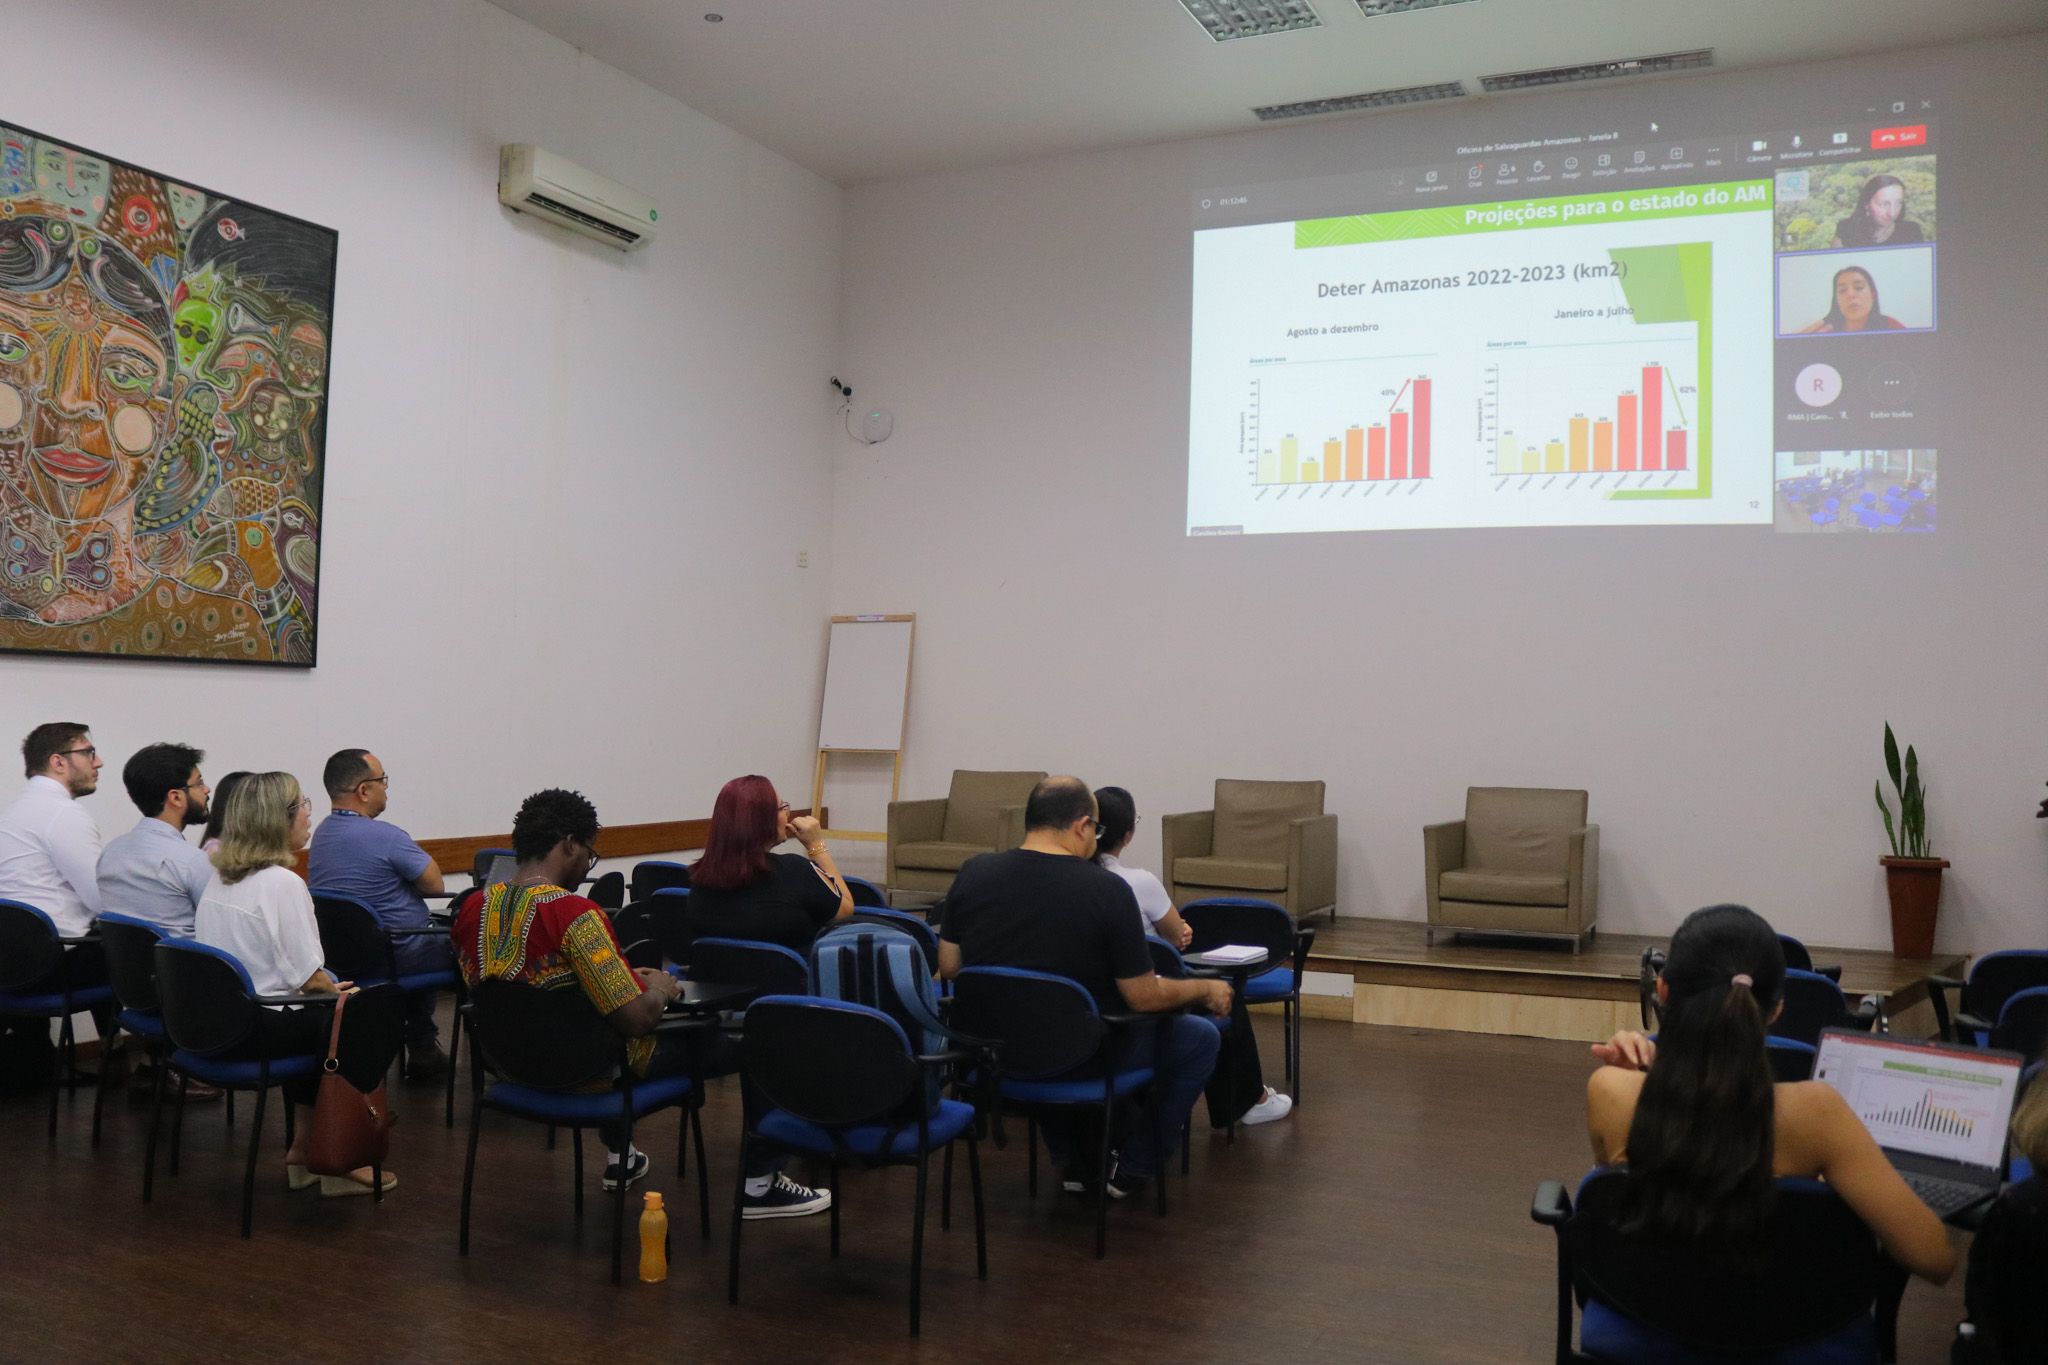 Project promotes workshops aimed at adapting Amazonas to the carbon market